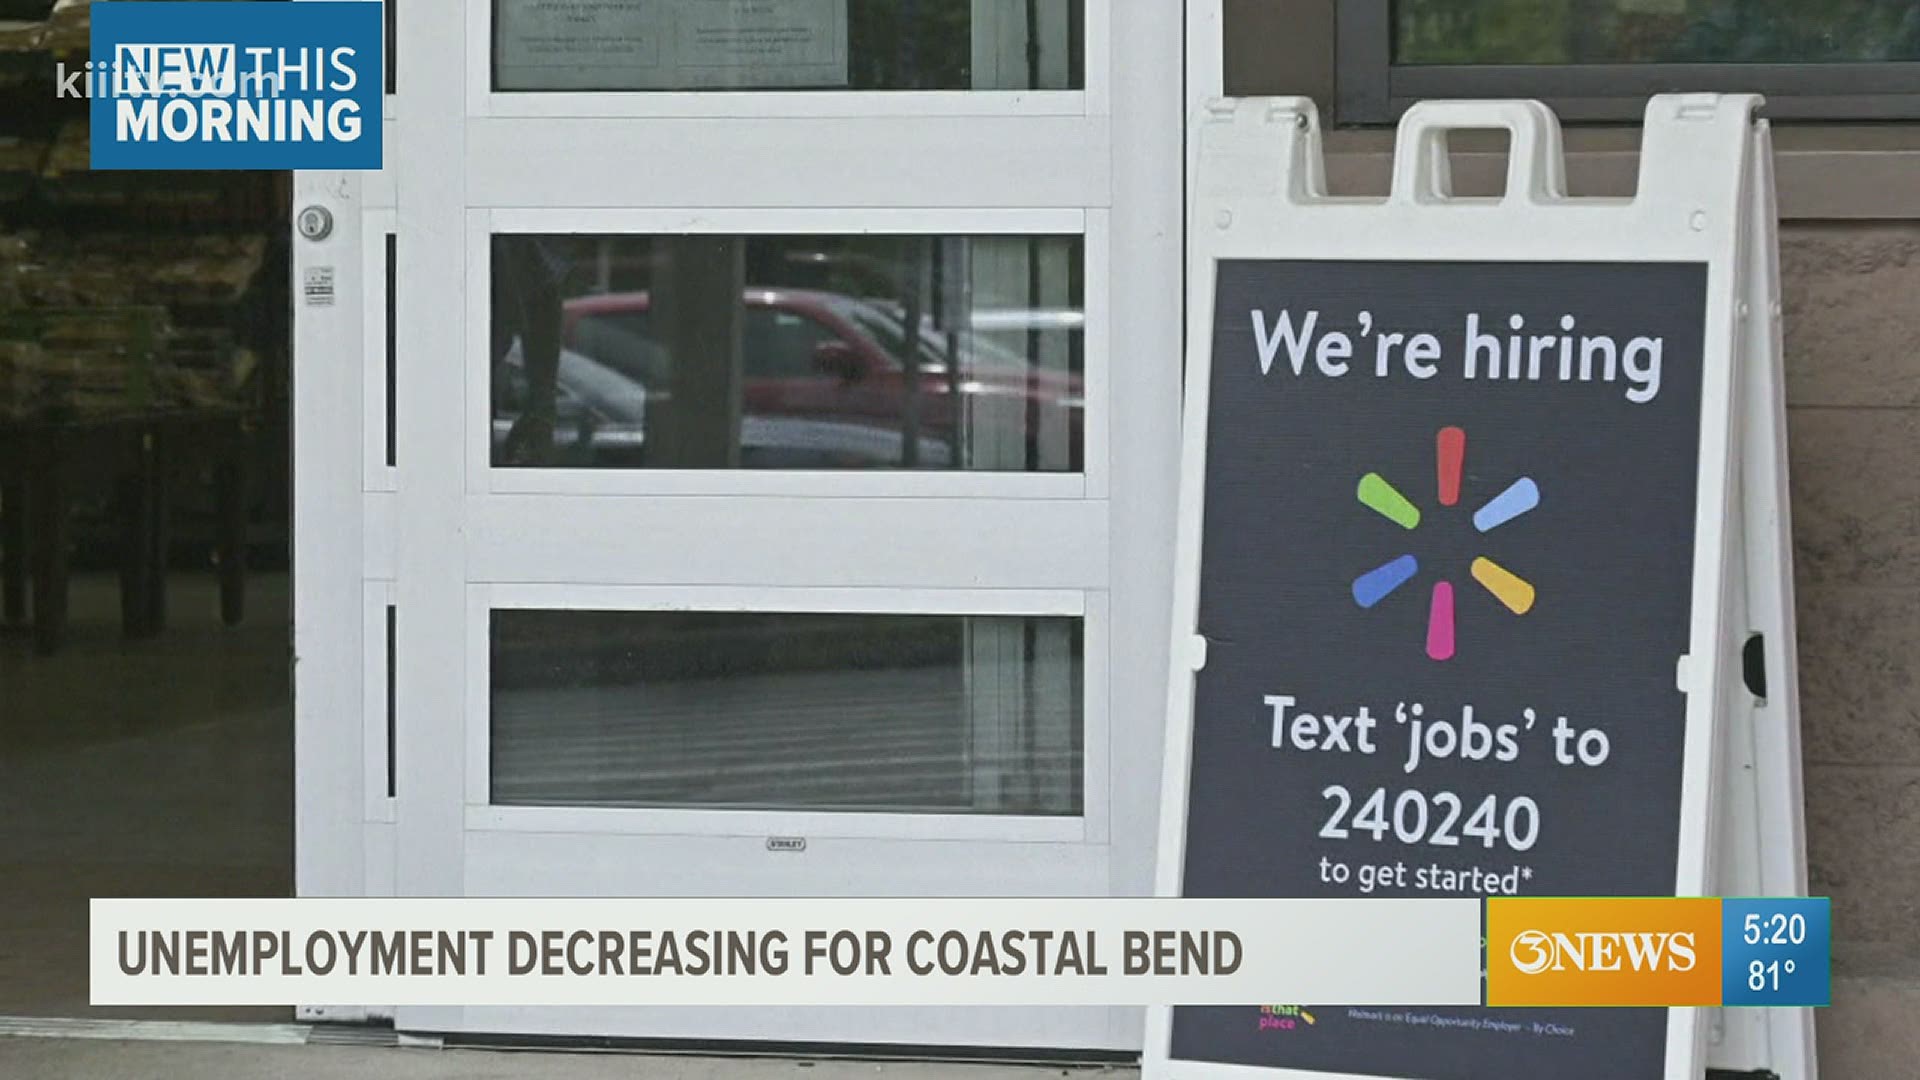 Unemployment rate decreasing in the Coastal Bend